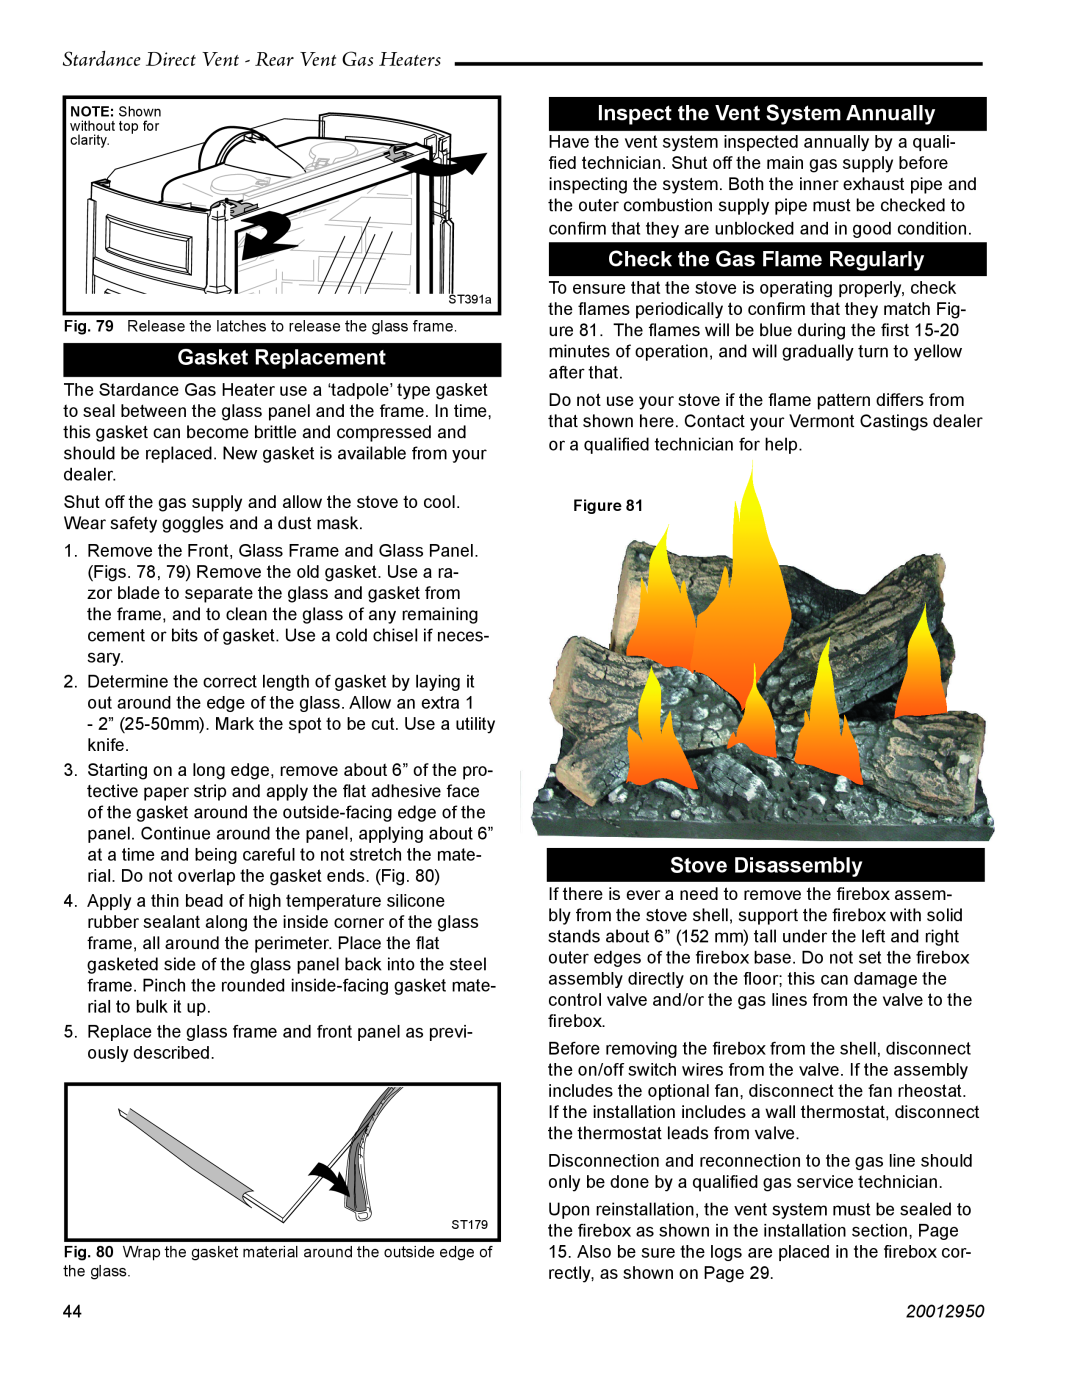 Vermont Casting SDDVRCCH Gasket Replacement, Inspect the Vent System Annually, Check the Gas Flame Regularly, 20012950 